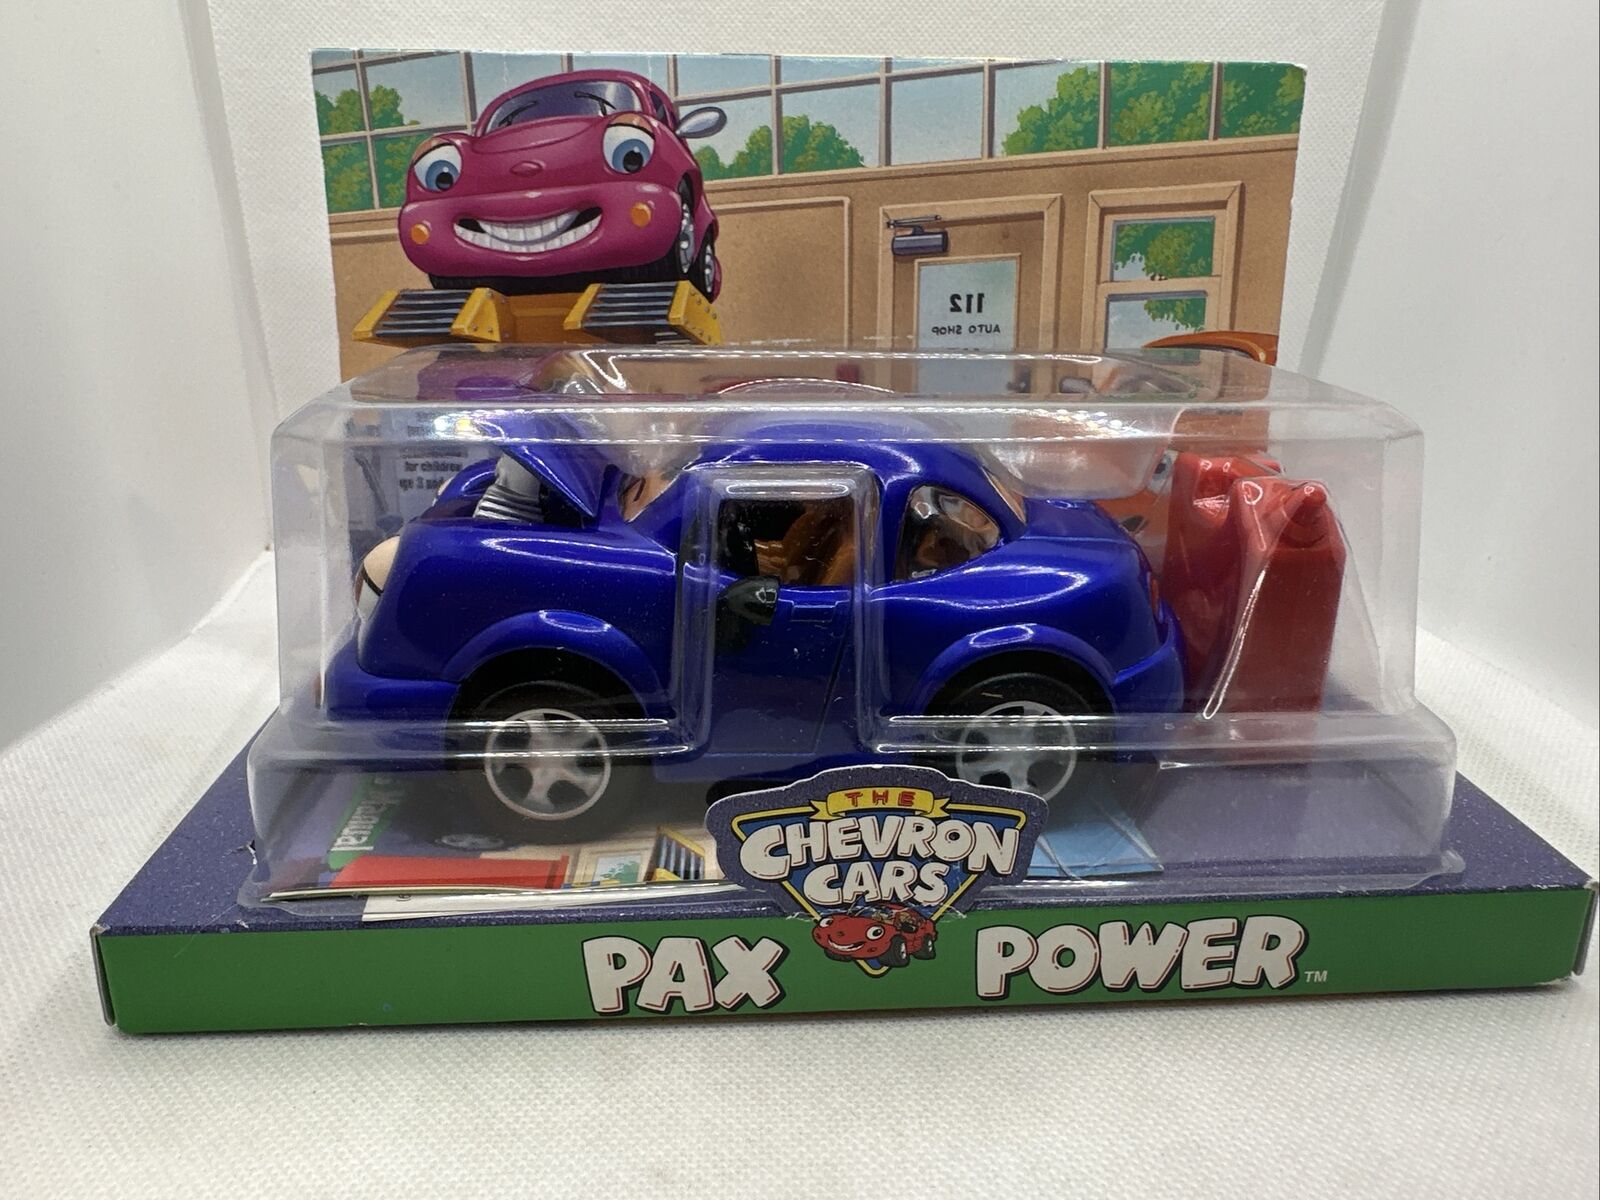 Vintage 2001 The Chevron Cars Pax Power Collectible Toy Car No 30